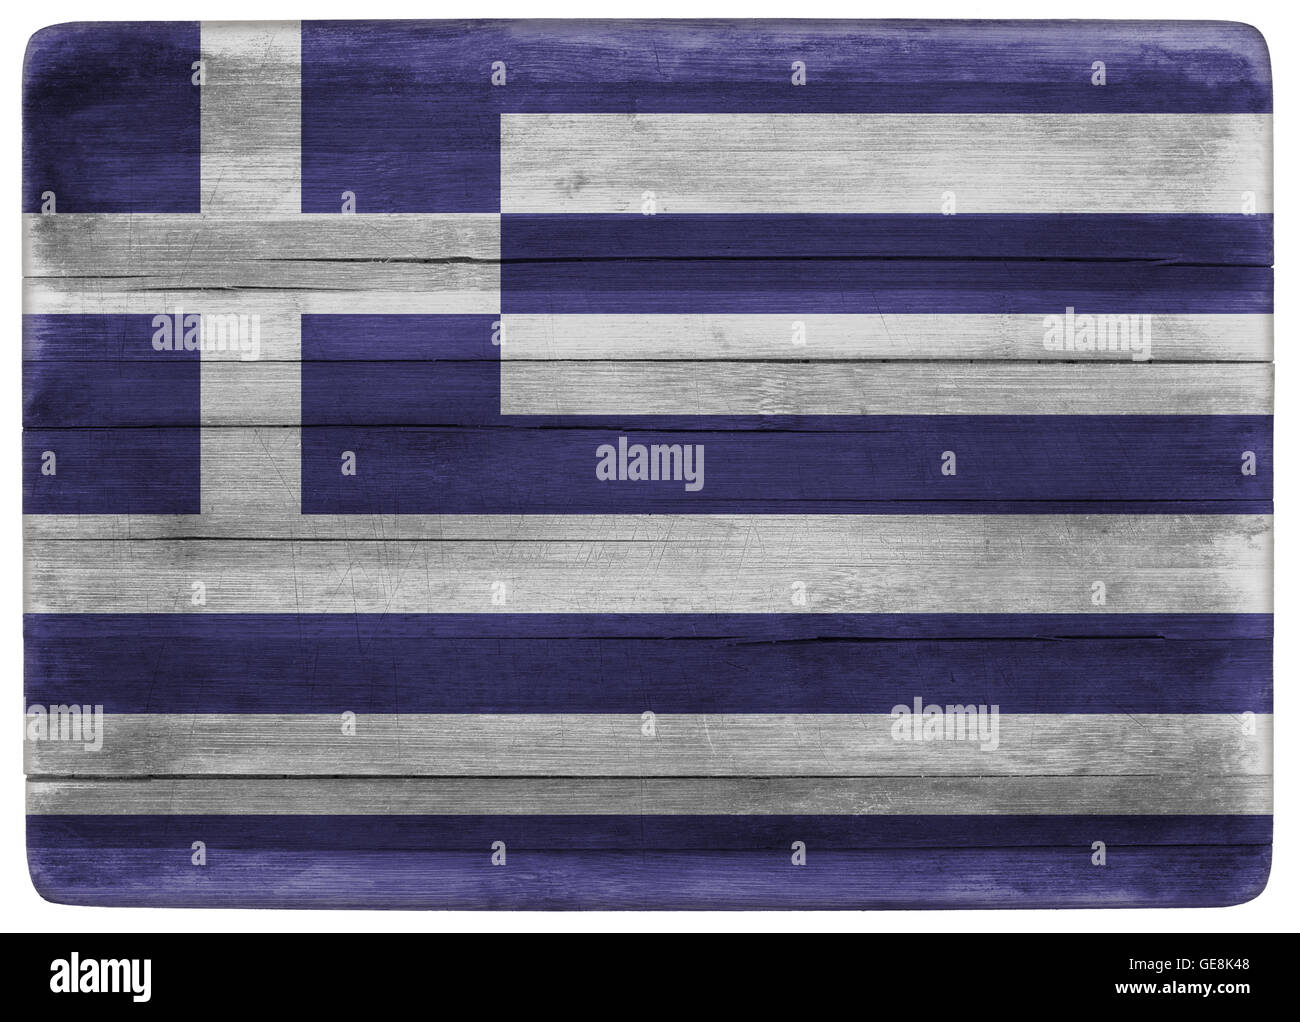 horizontal front view 3d illustration of an Greece flag on wooden cooking textured board Stock Photo